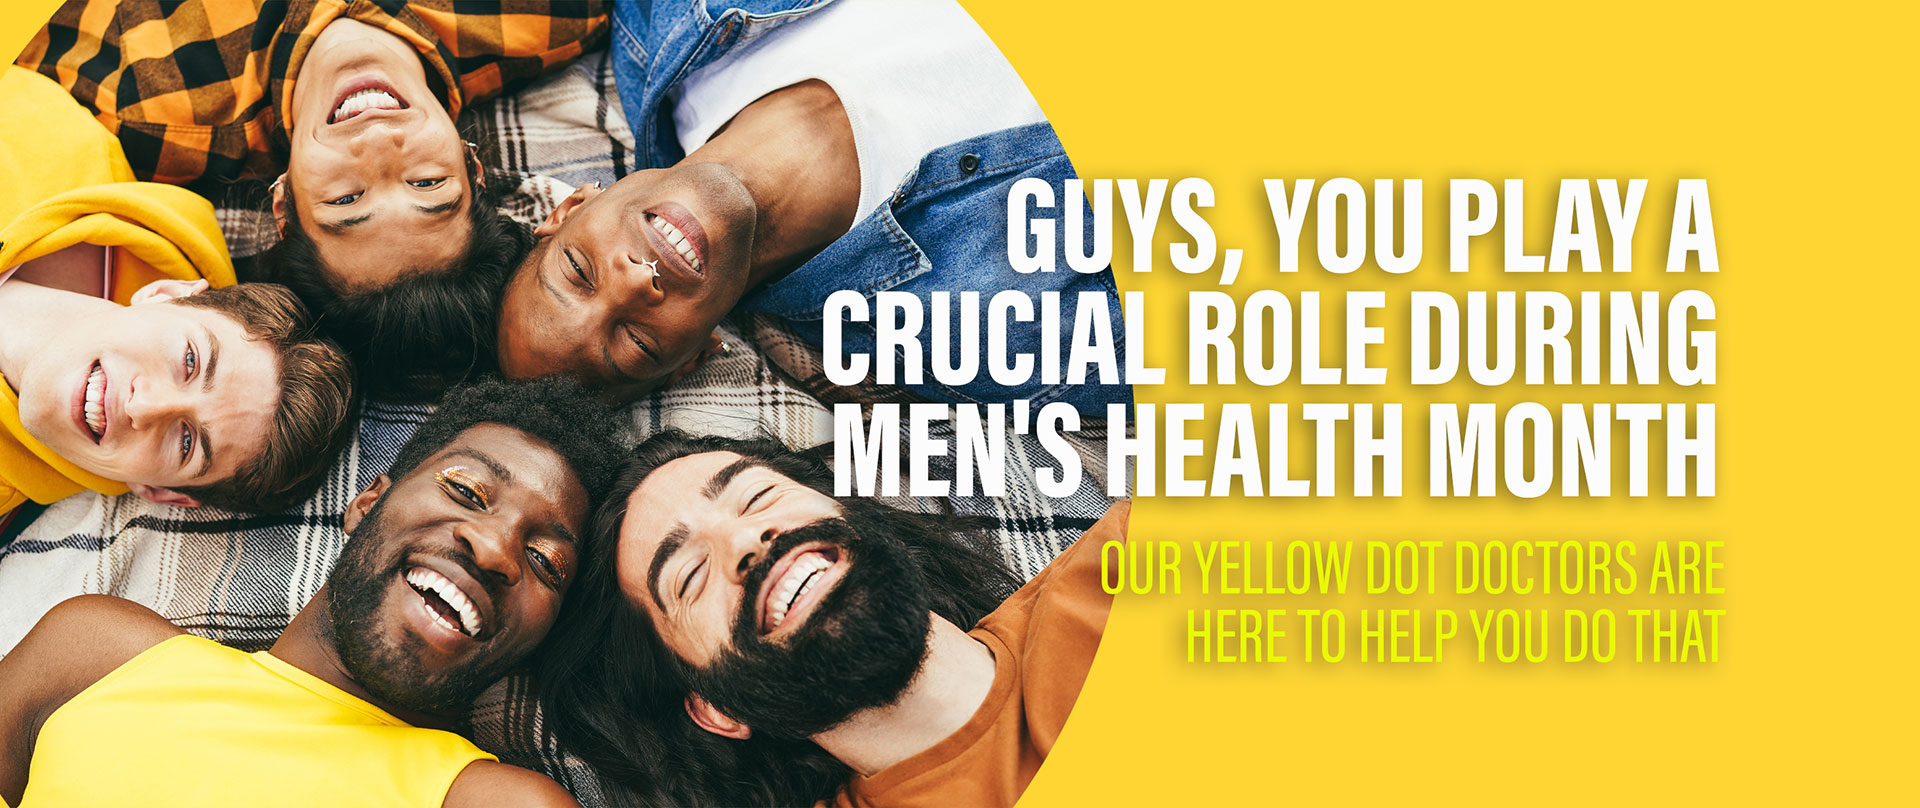 Guys, You Play A Crucial Role During Men’s Health Month